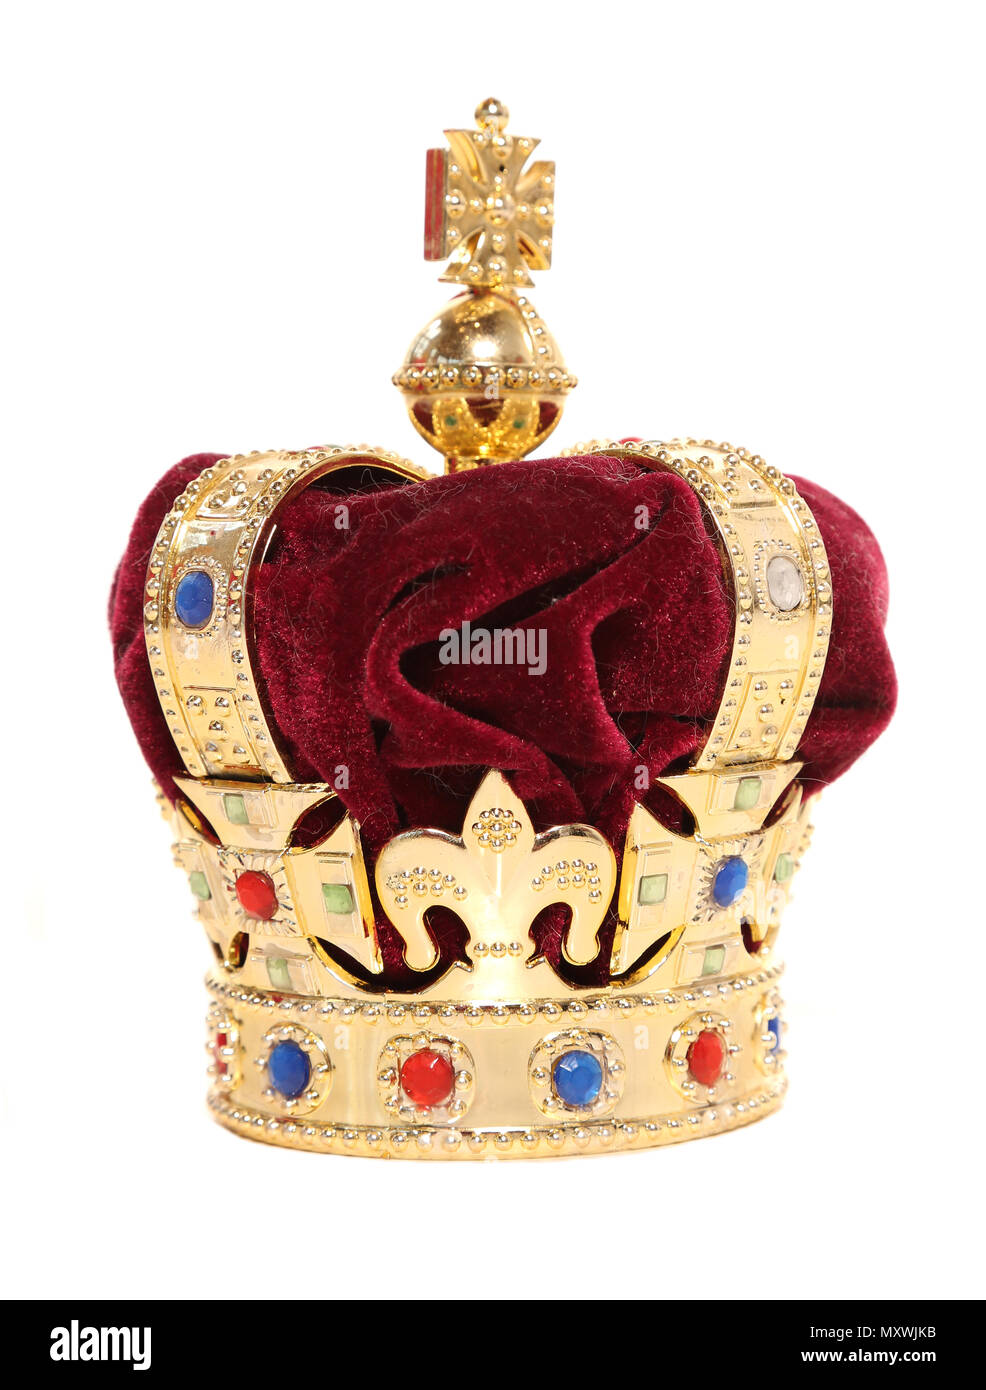 toy crown for dressing up role play cut out Stock Photo